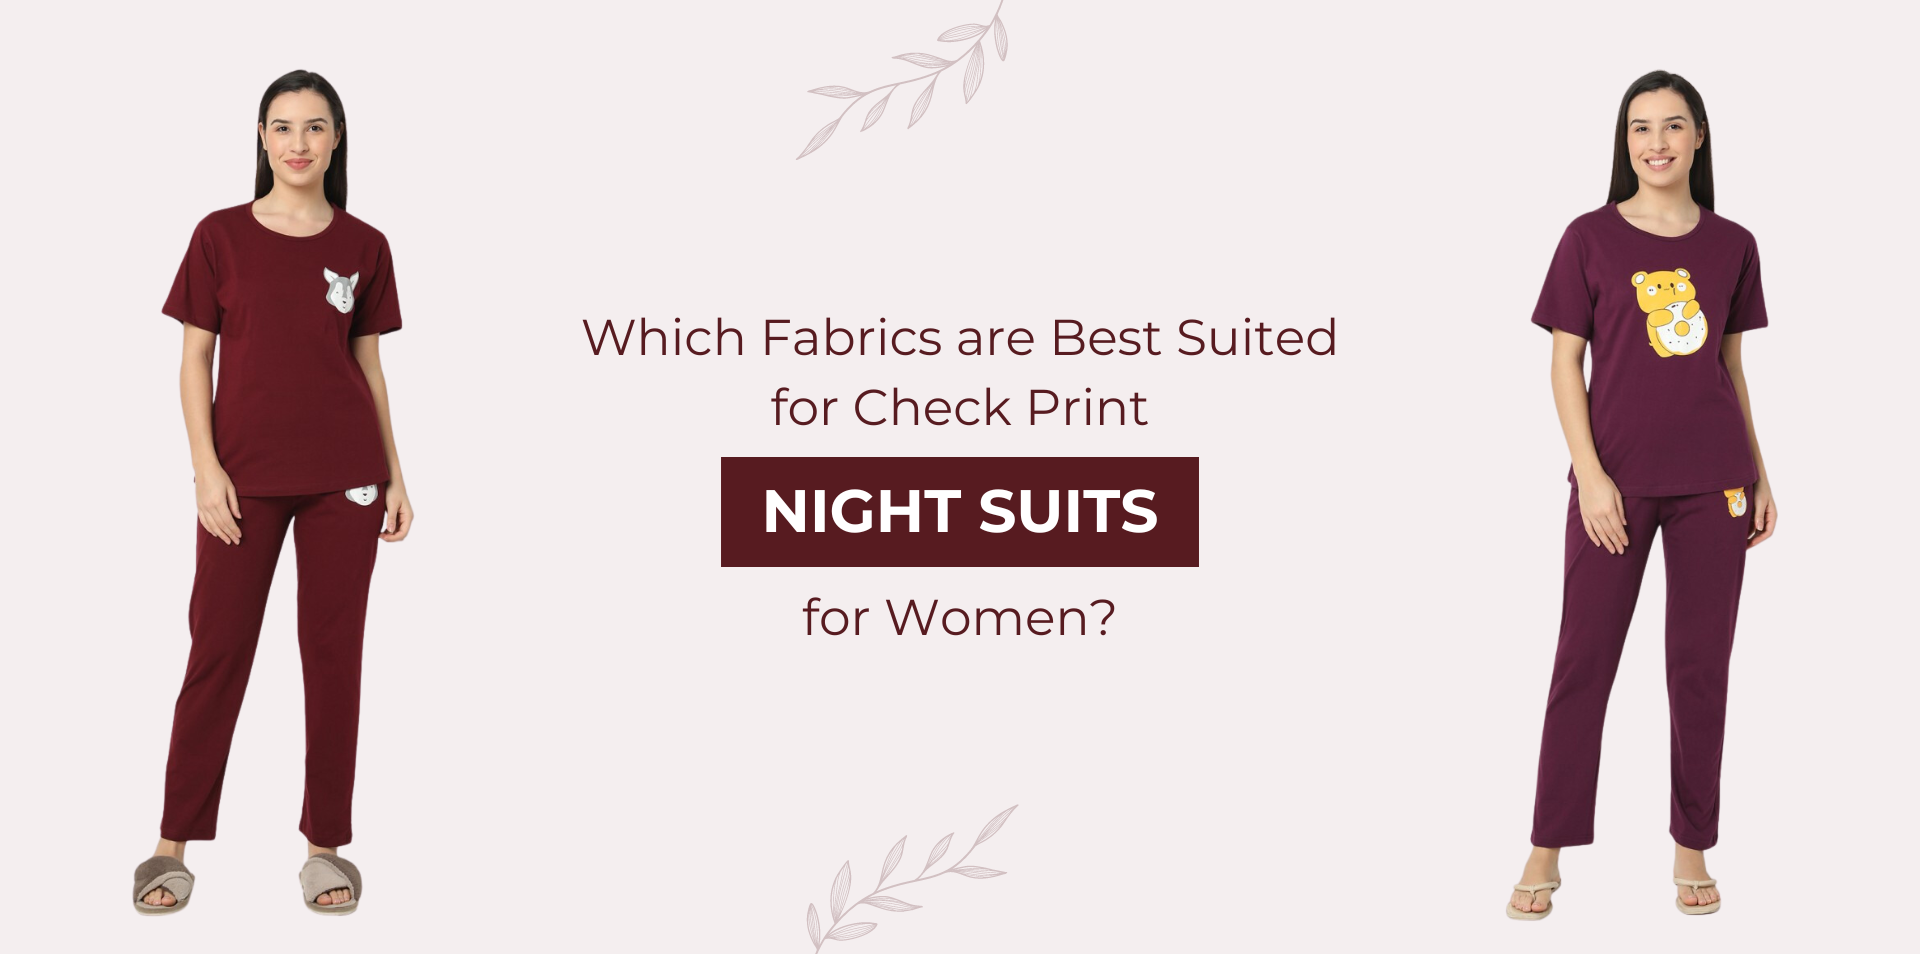 Which Fabrics are Best Suited for Check Print Night Suits for Women?